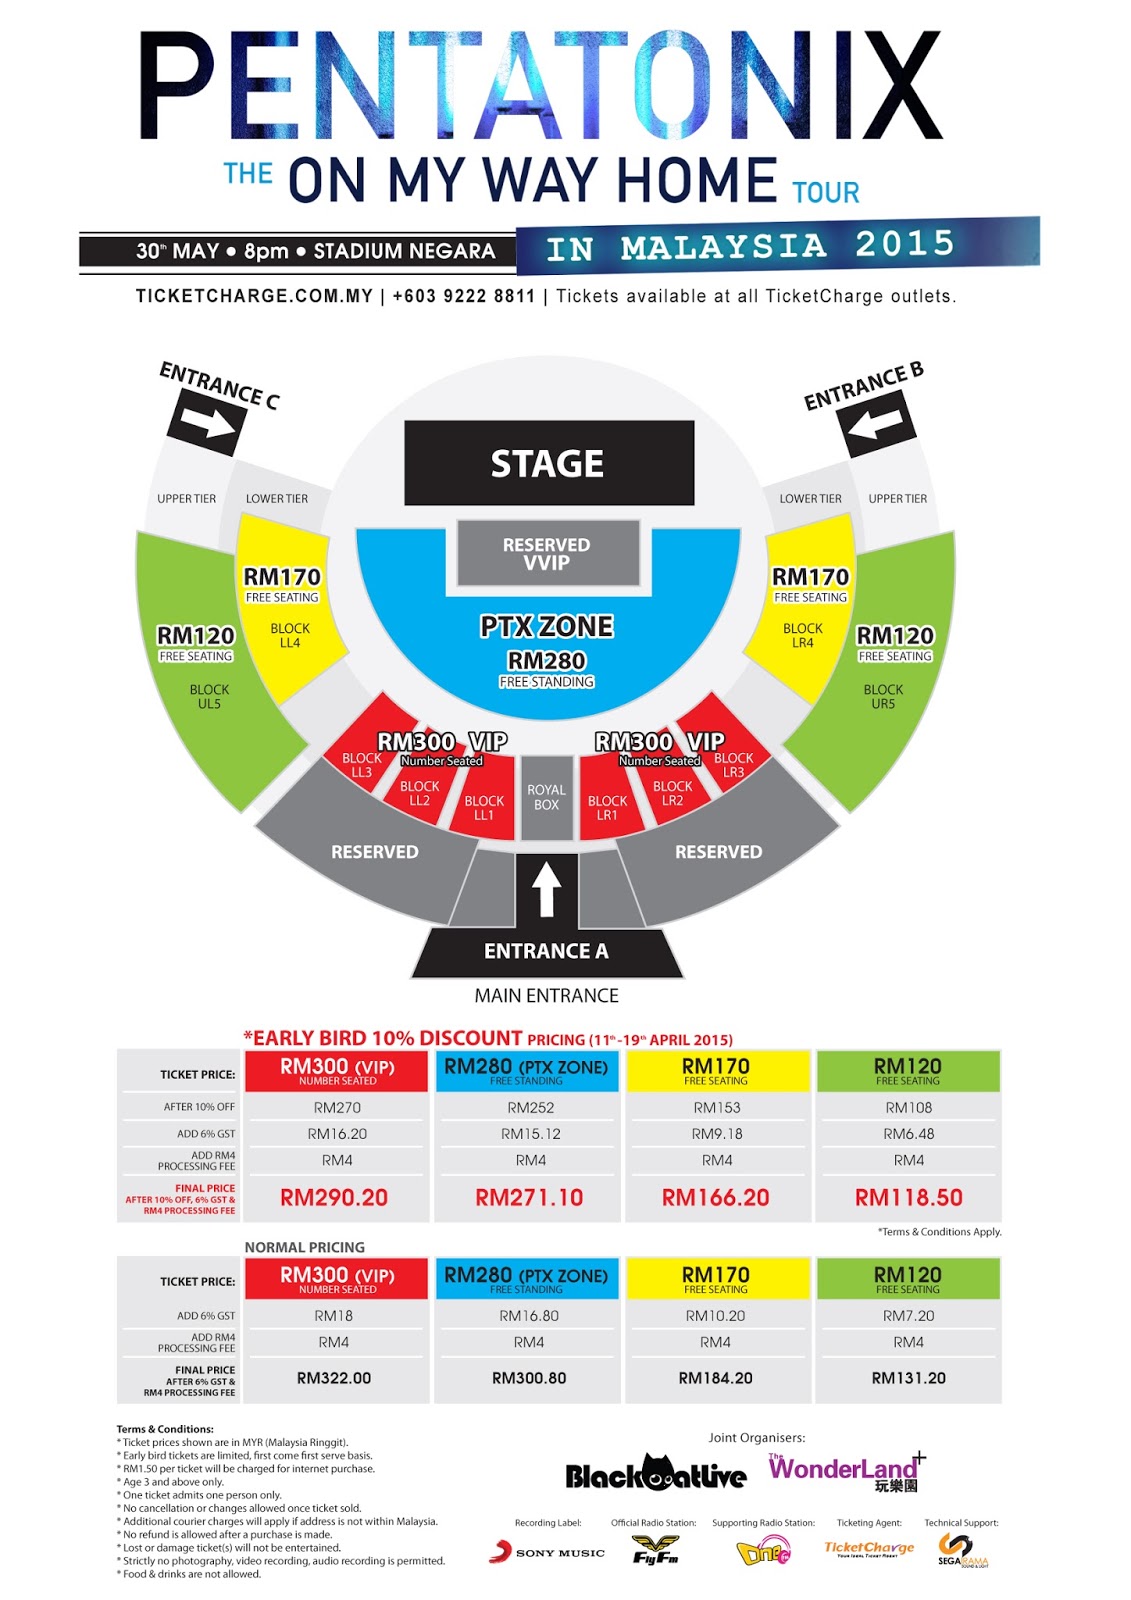 PENTATONIX Live in Malaysia 2015 - The On My Way Home Tour Seating Plan